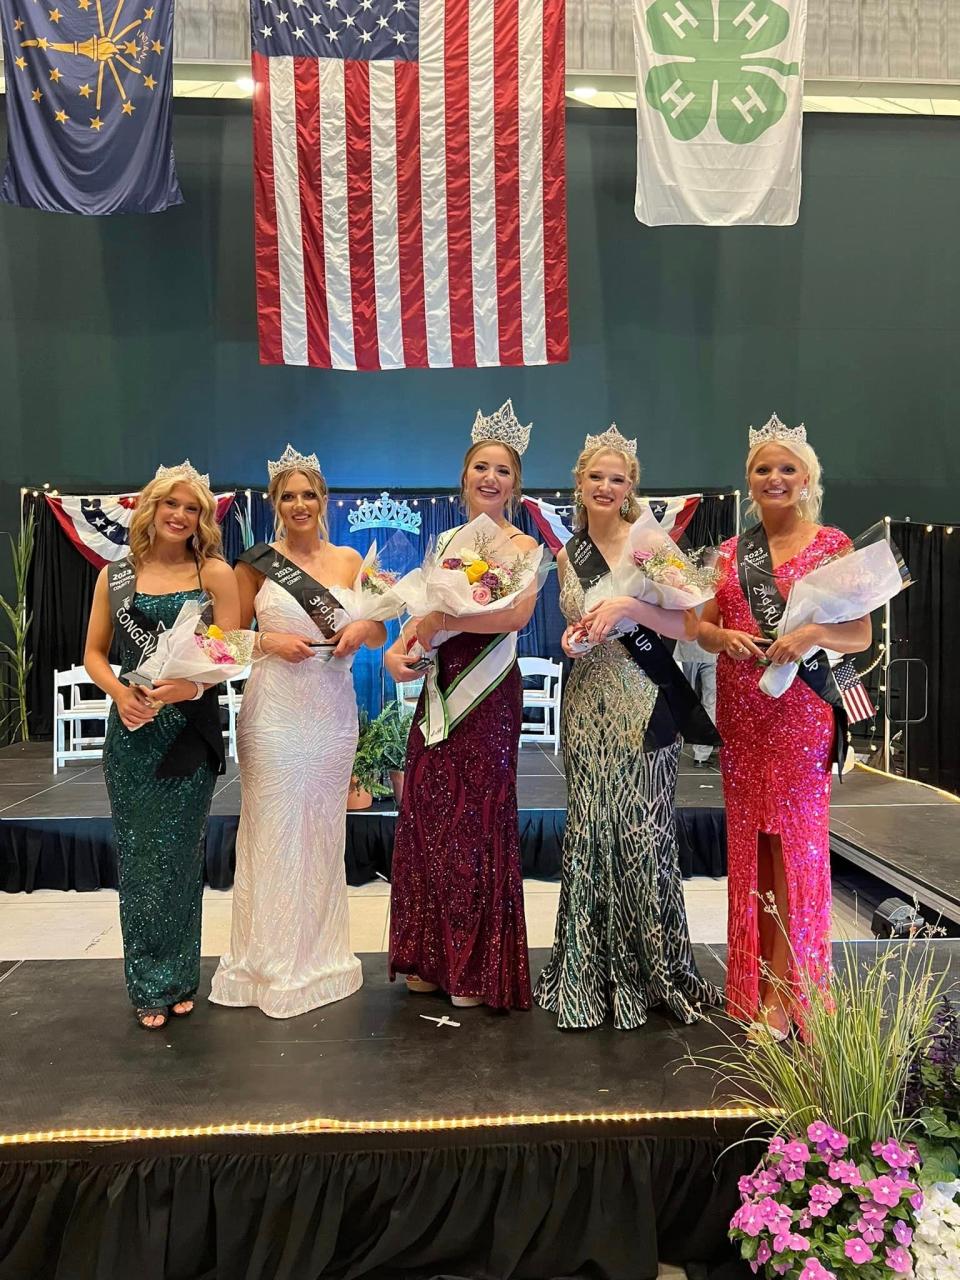 The court members for this year's Tippecanoe County 4-H Pageant Queen event.